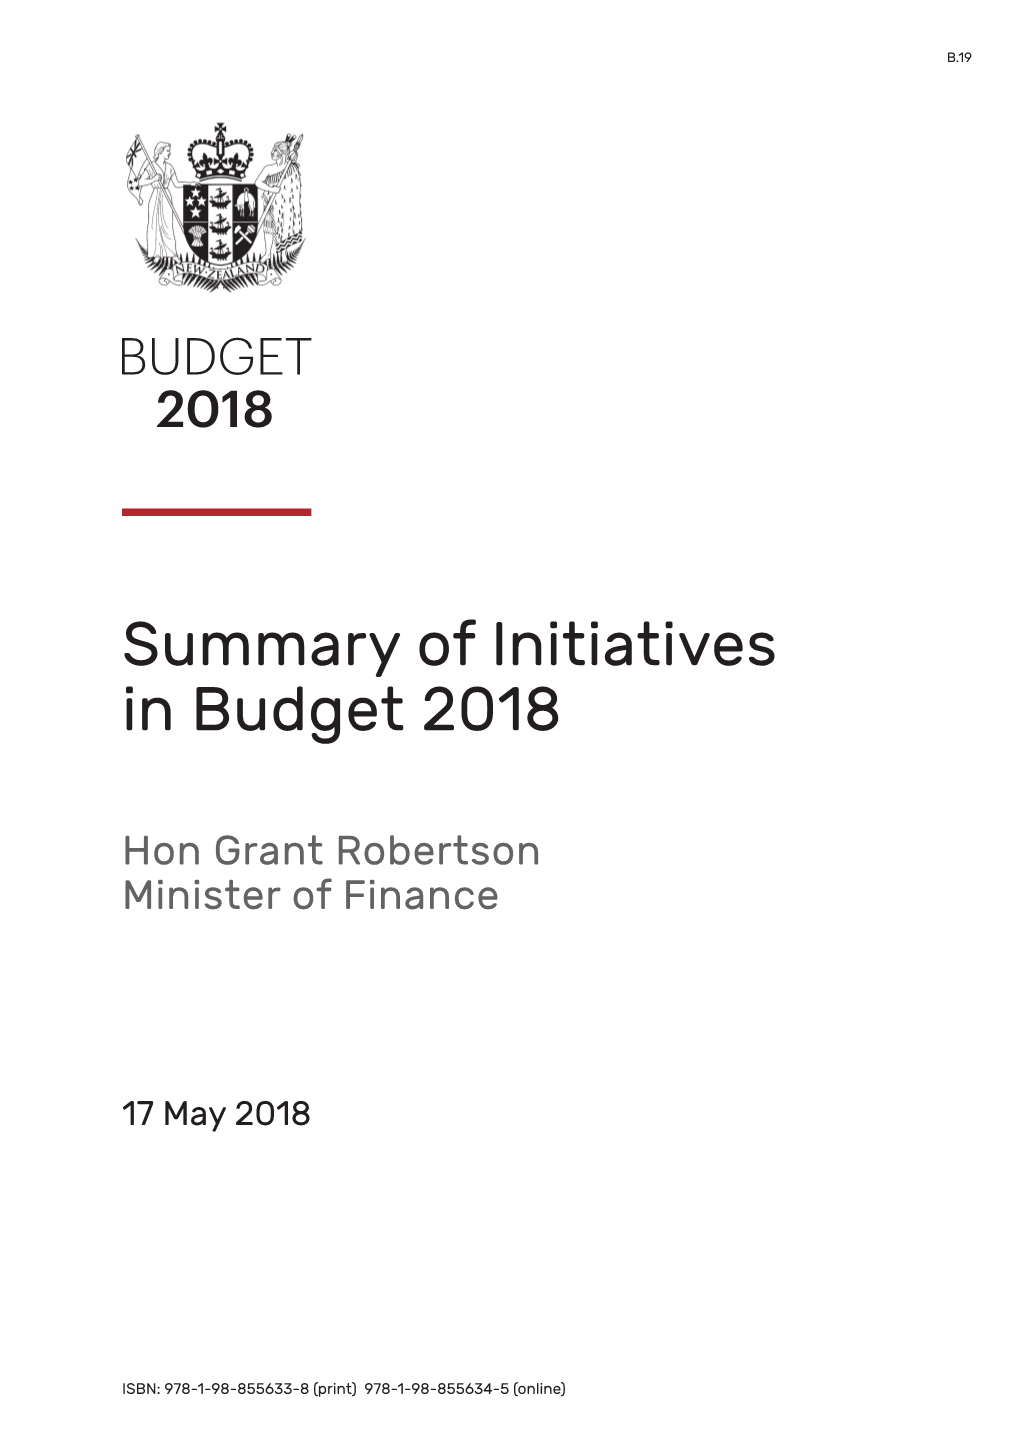 Summary of Initiatives in Budget 2018